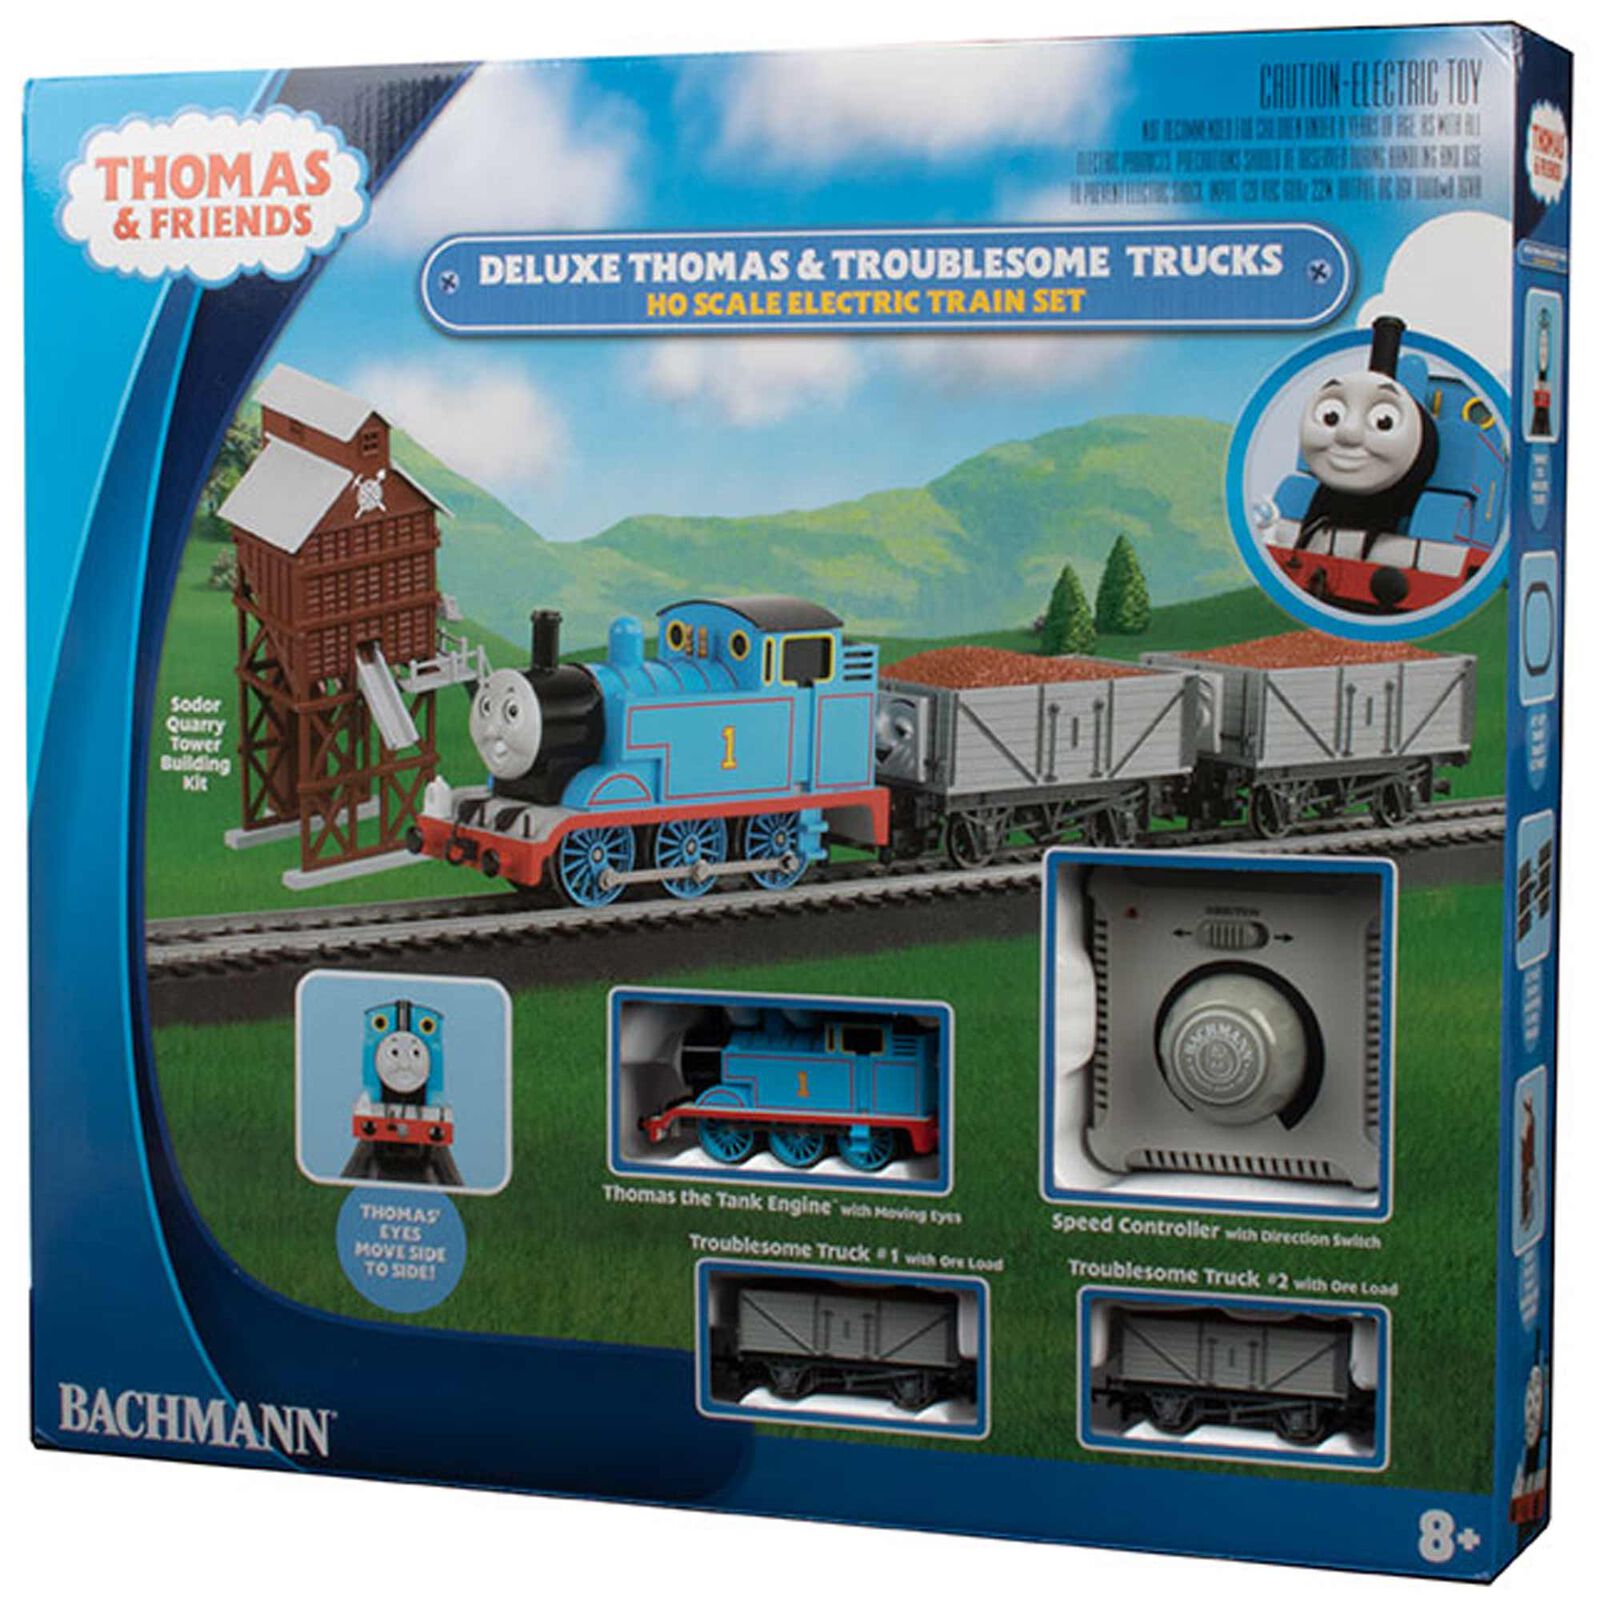 BACHMANN 00760 HO Deluxe Thomas & the Troublesome Trucks Freight Set